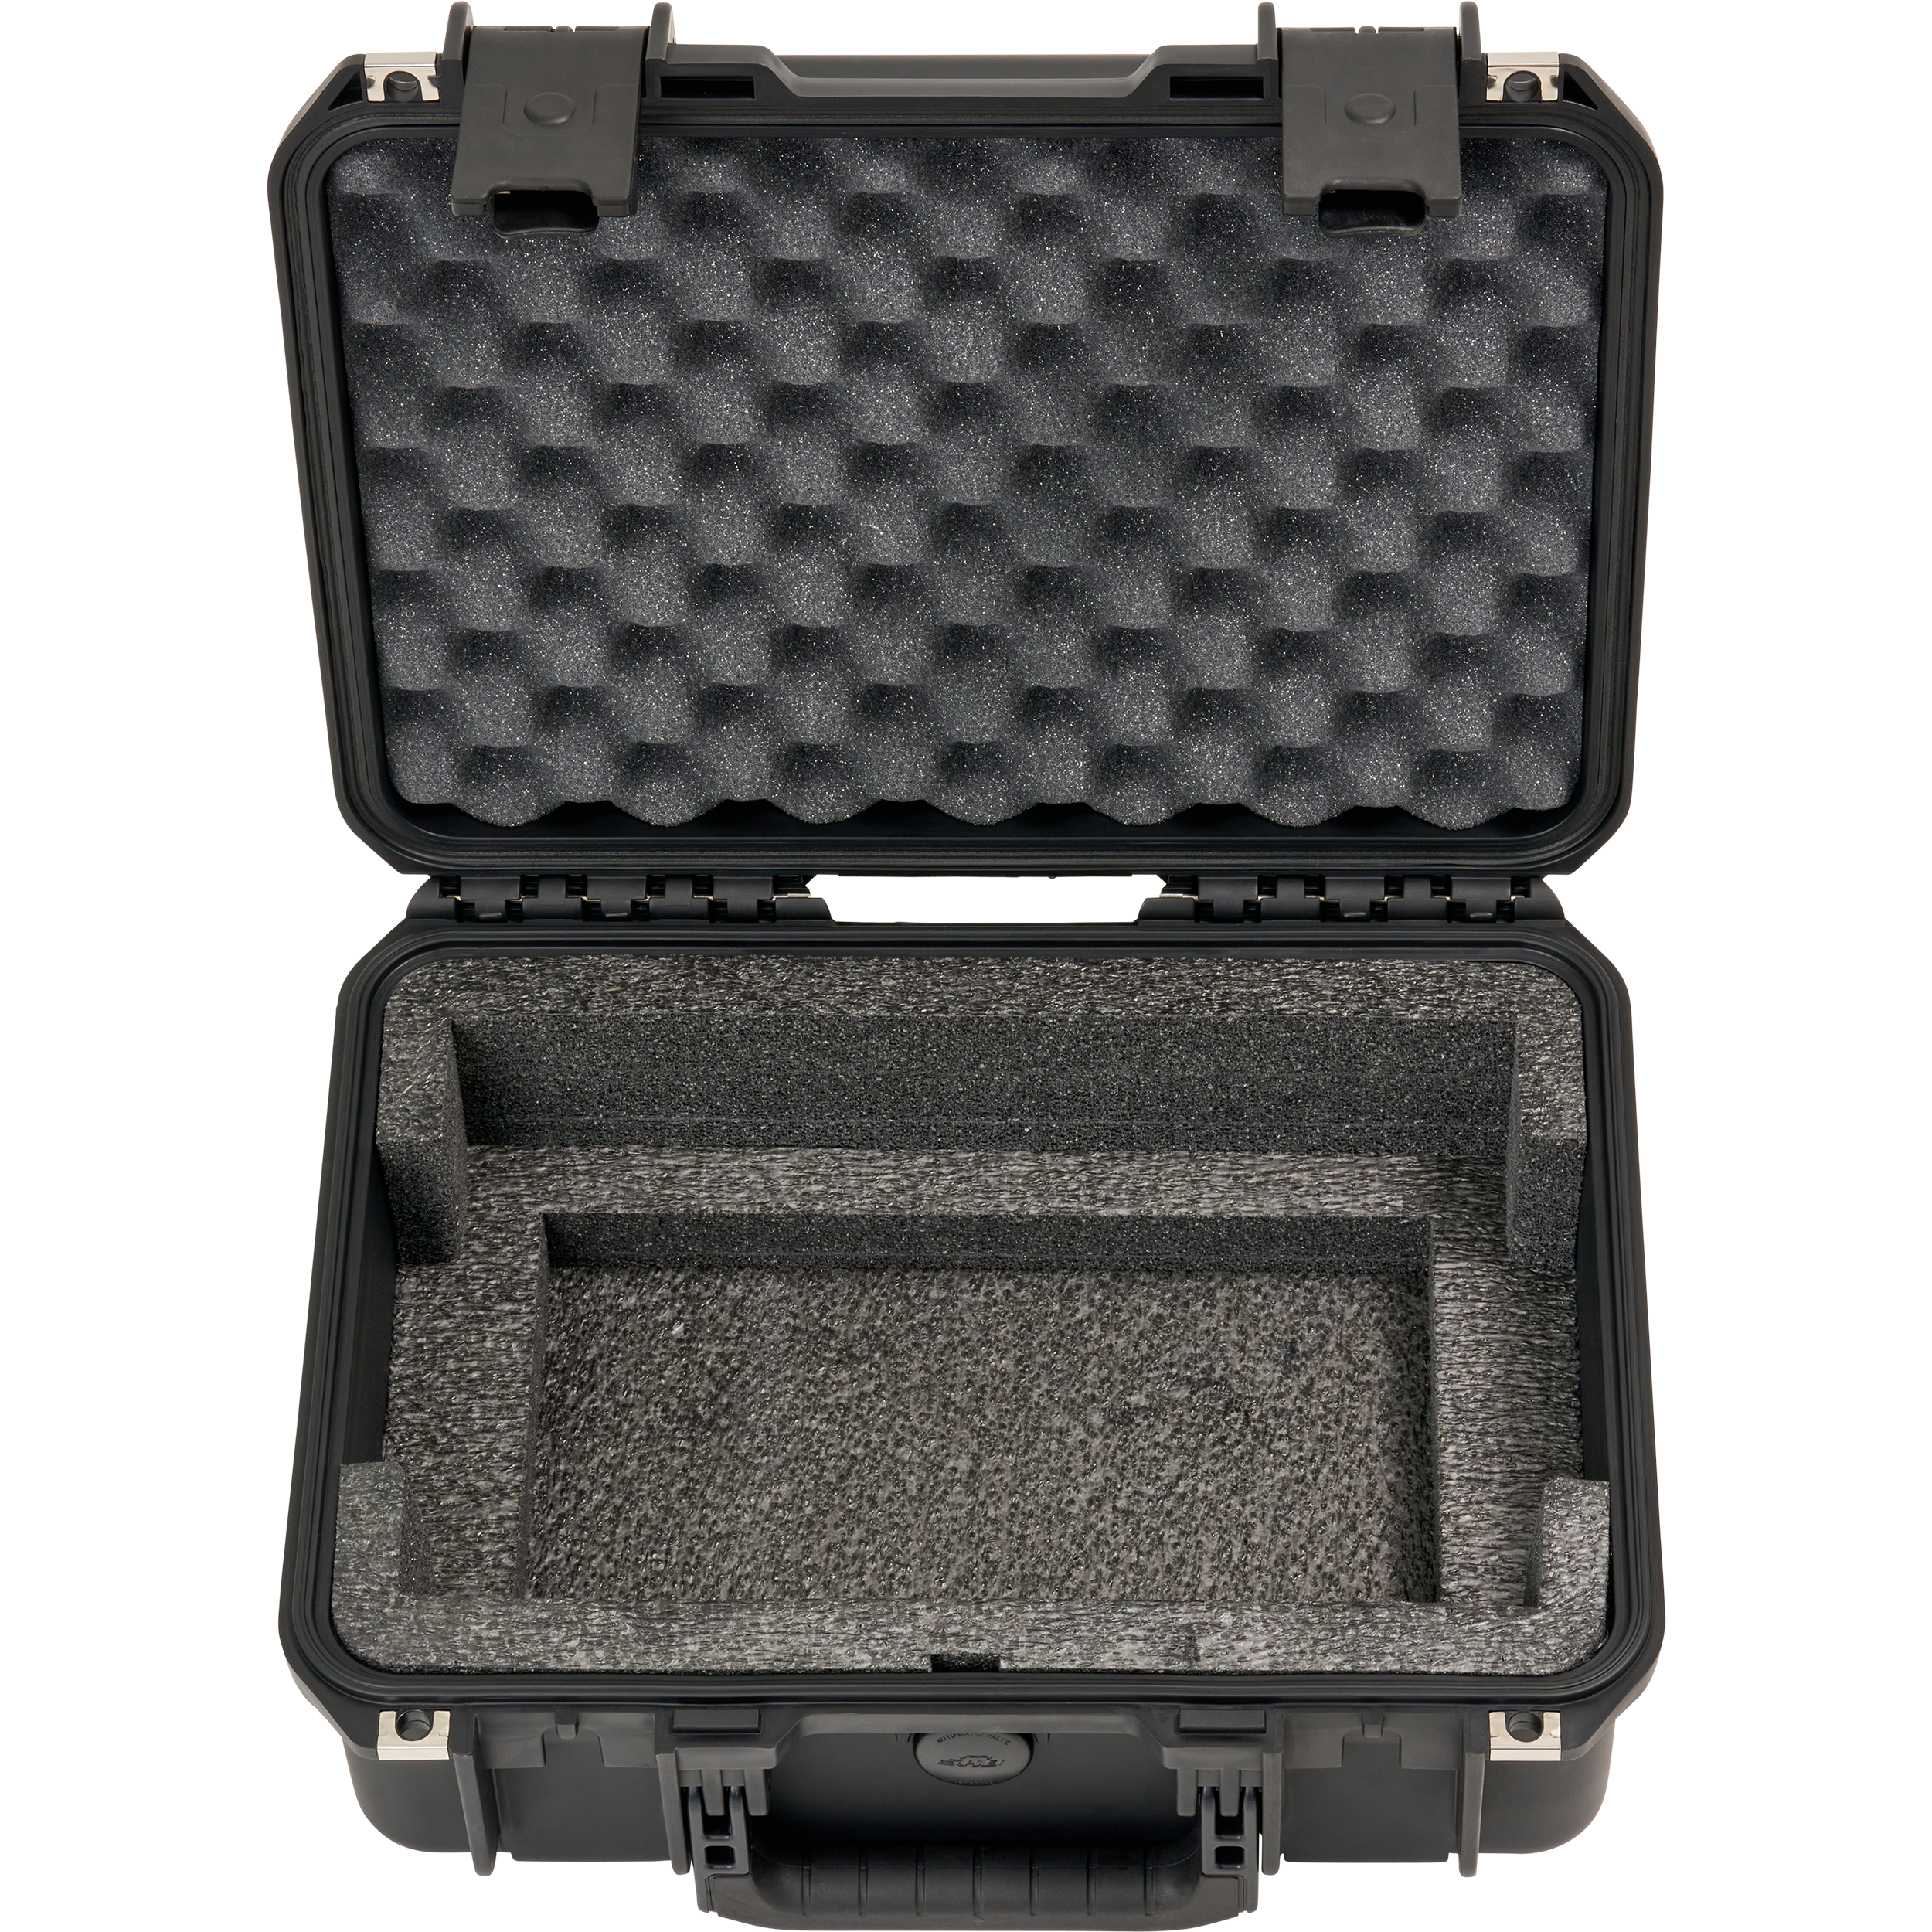 BYFP ipCase for Roland VR-4HD